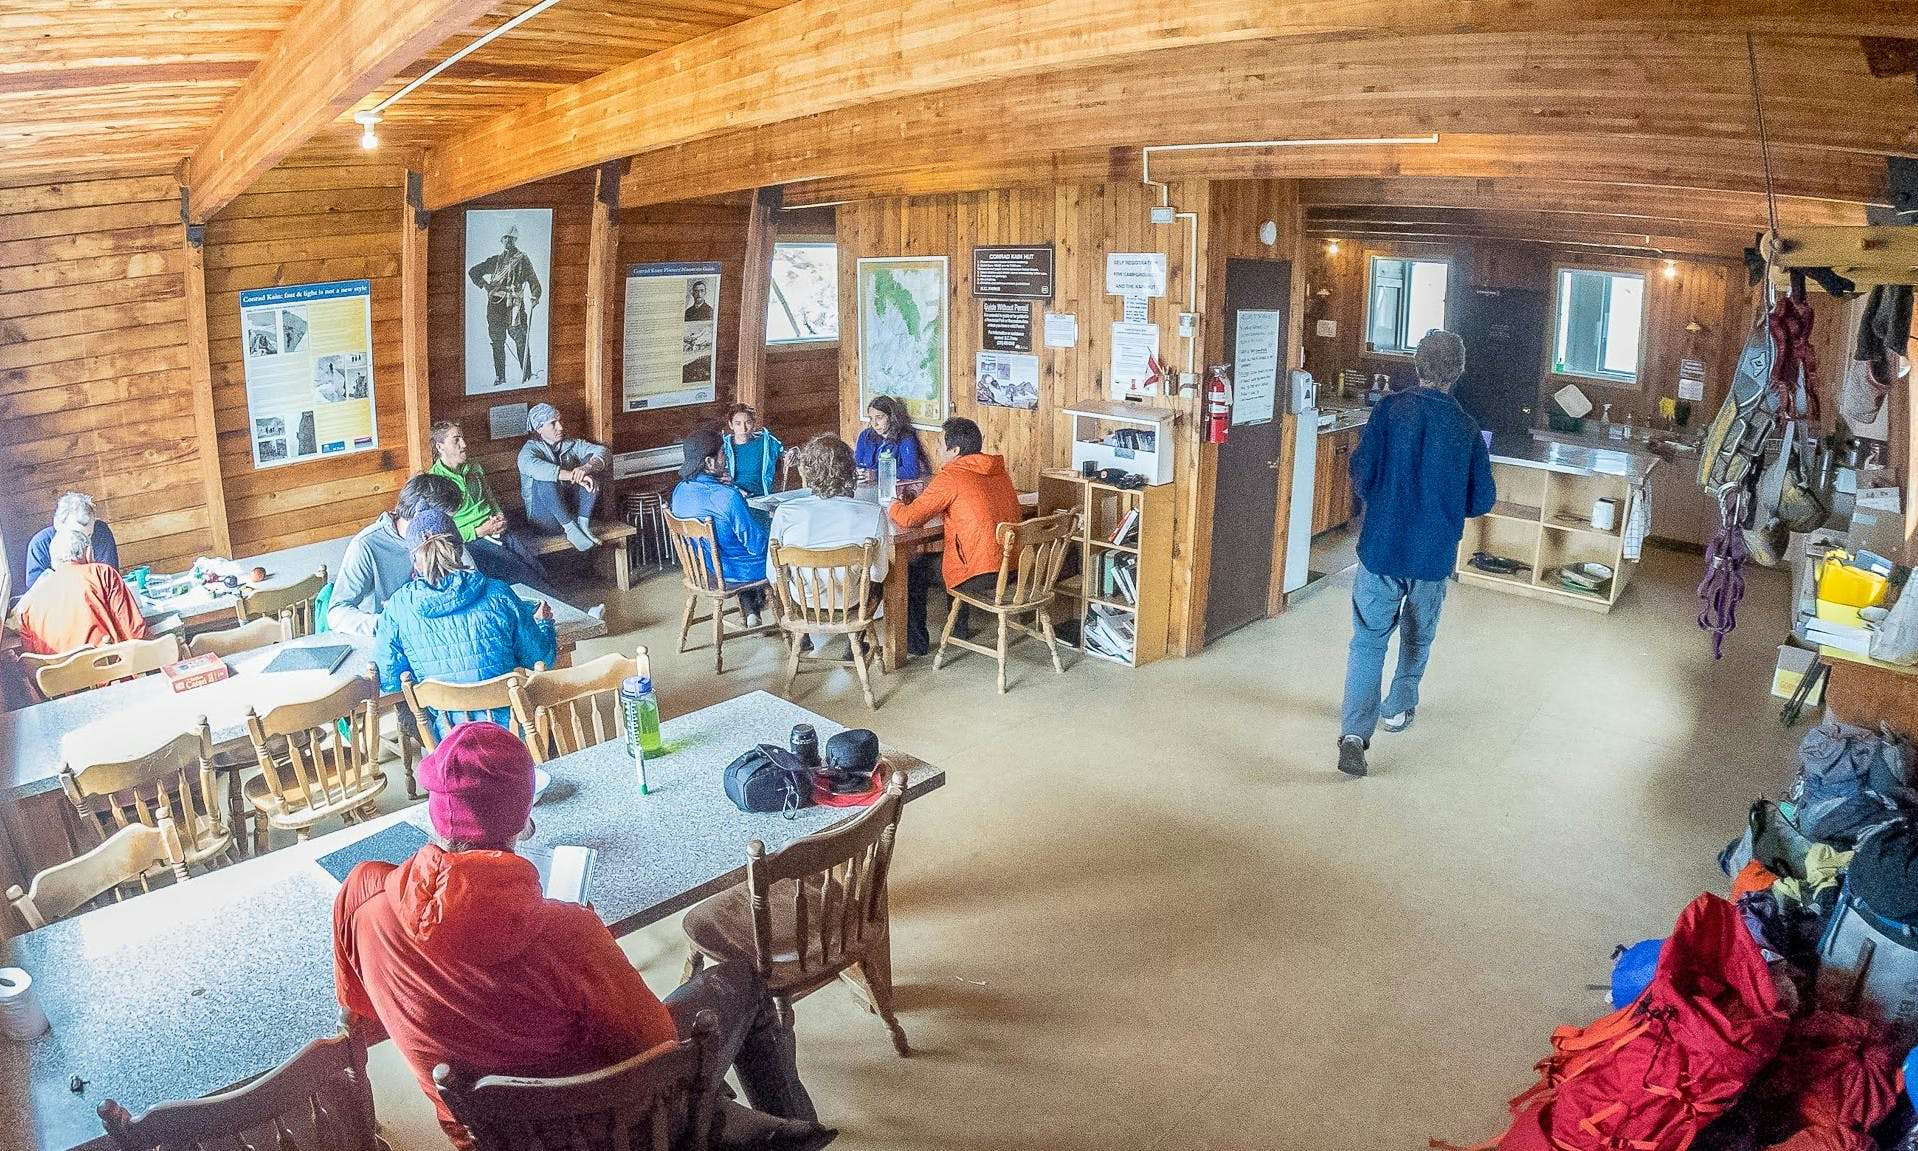 People in a cabin sitting at tables and eating